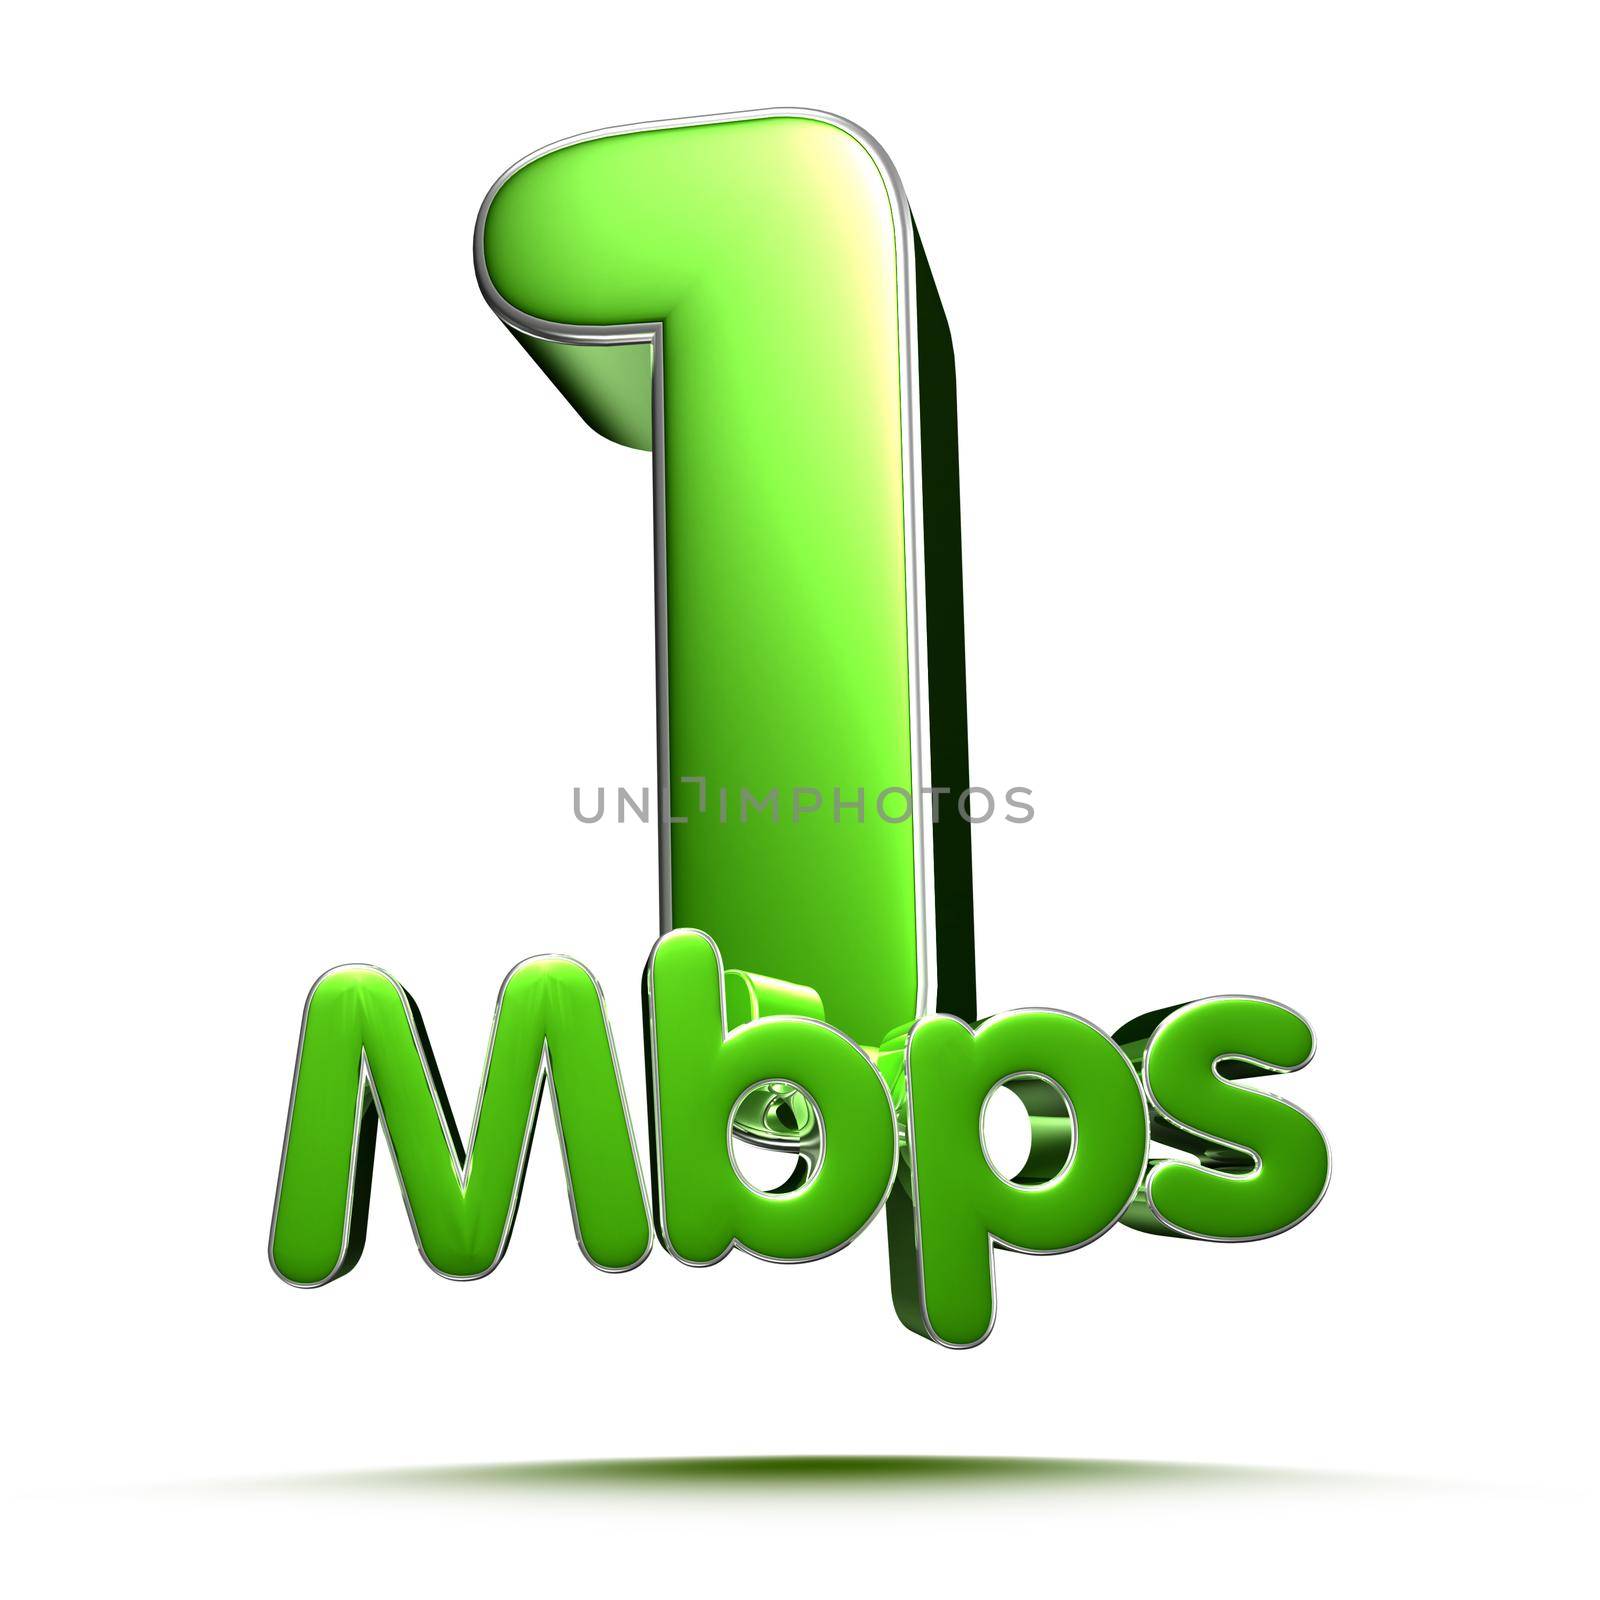 1 Mbps green 3D illustration on white background with clipping path.